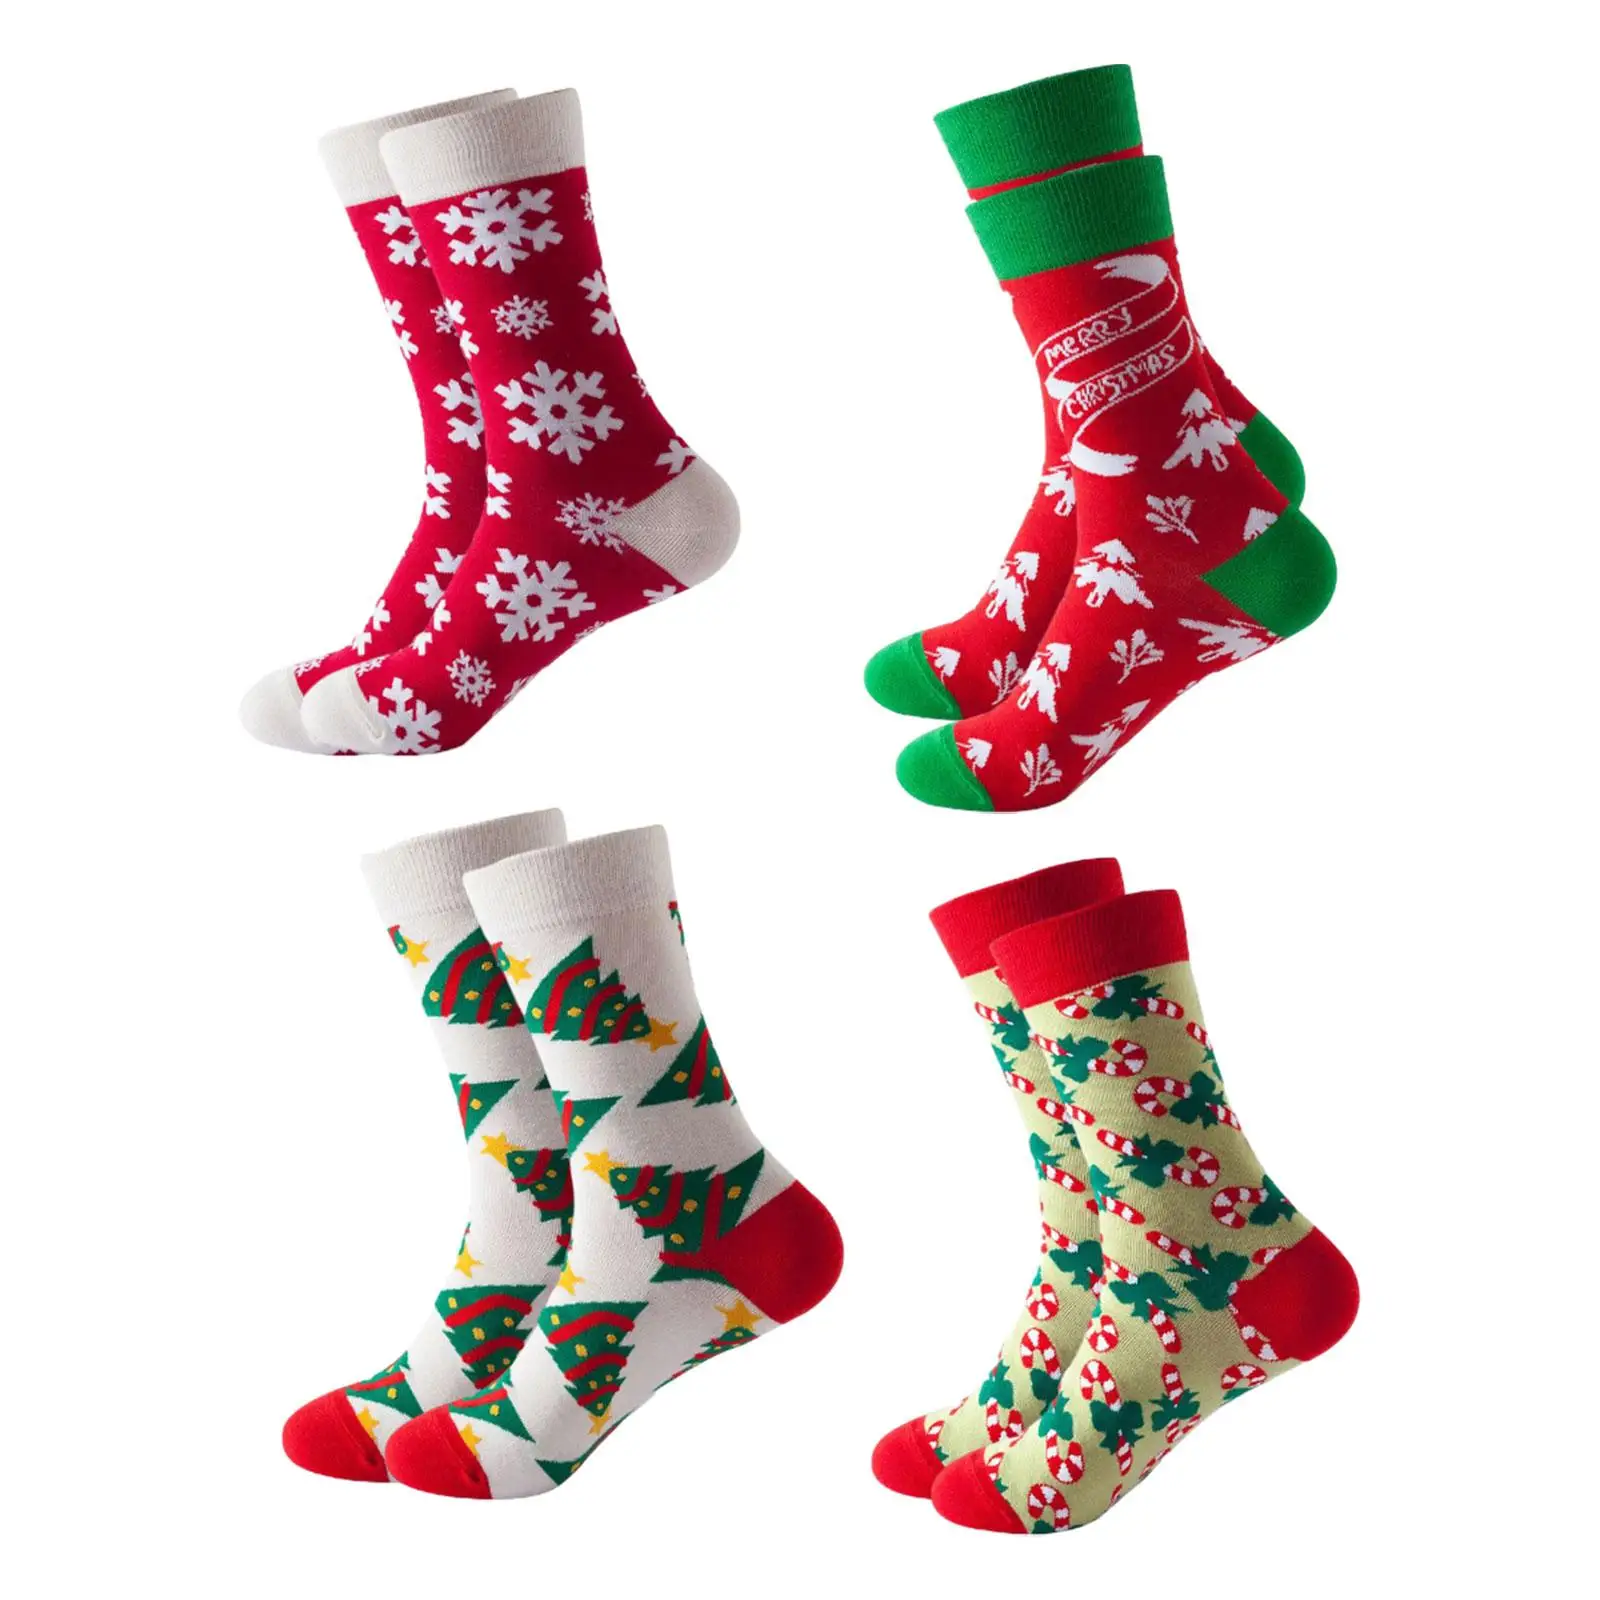 4 Pairs Christmas Socks Boot Stockings Thick Fashion Soft Warmer Socks for Work Cold Weather Daily Wear Festival Fancy Christmas